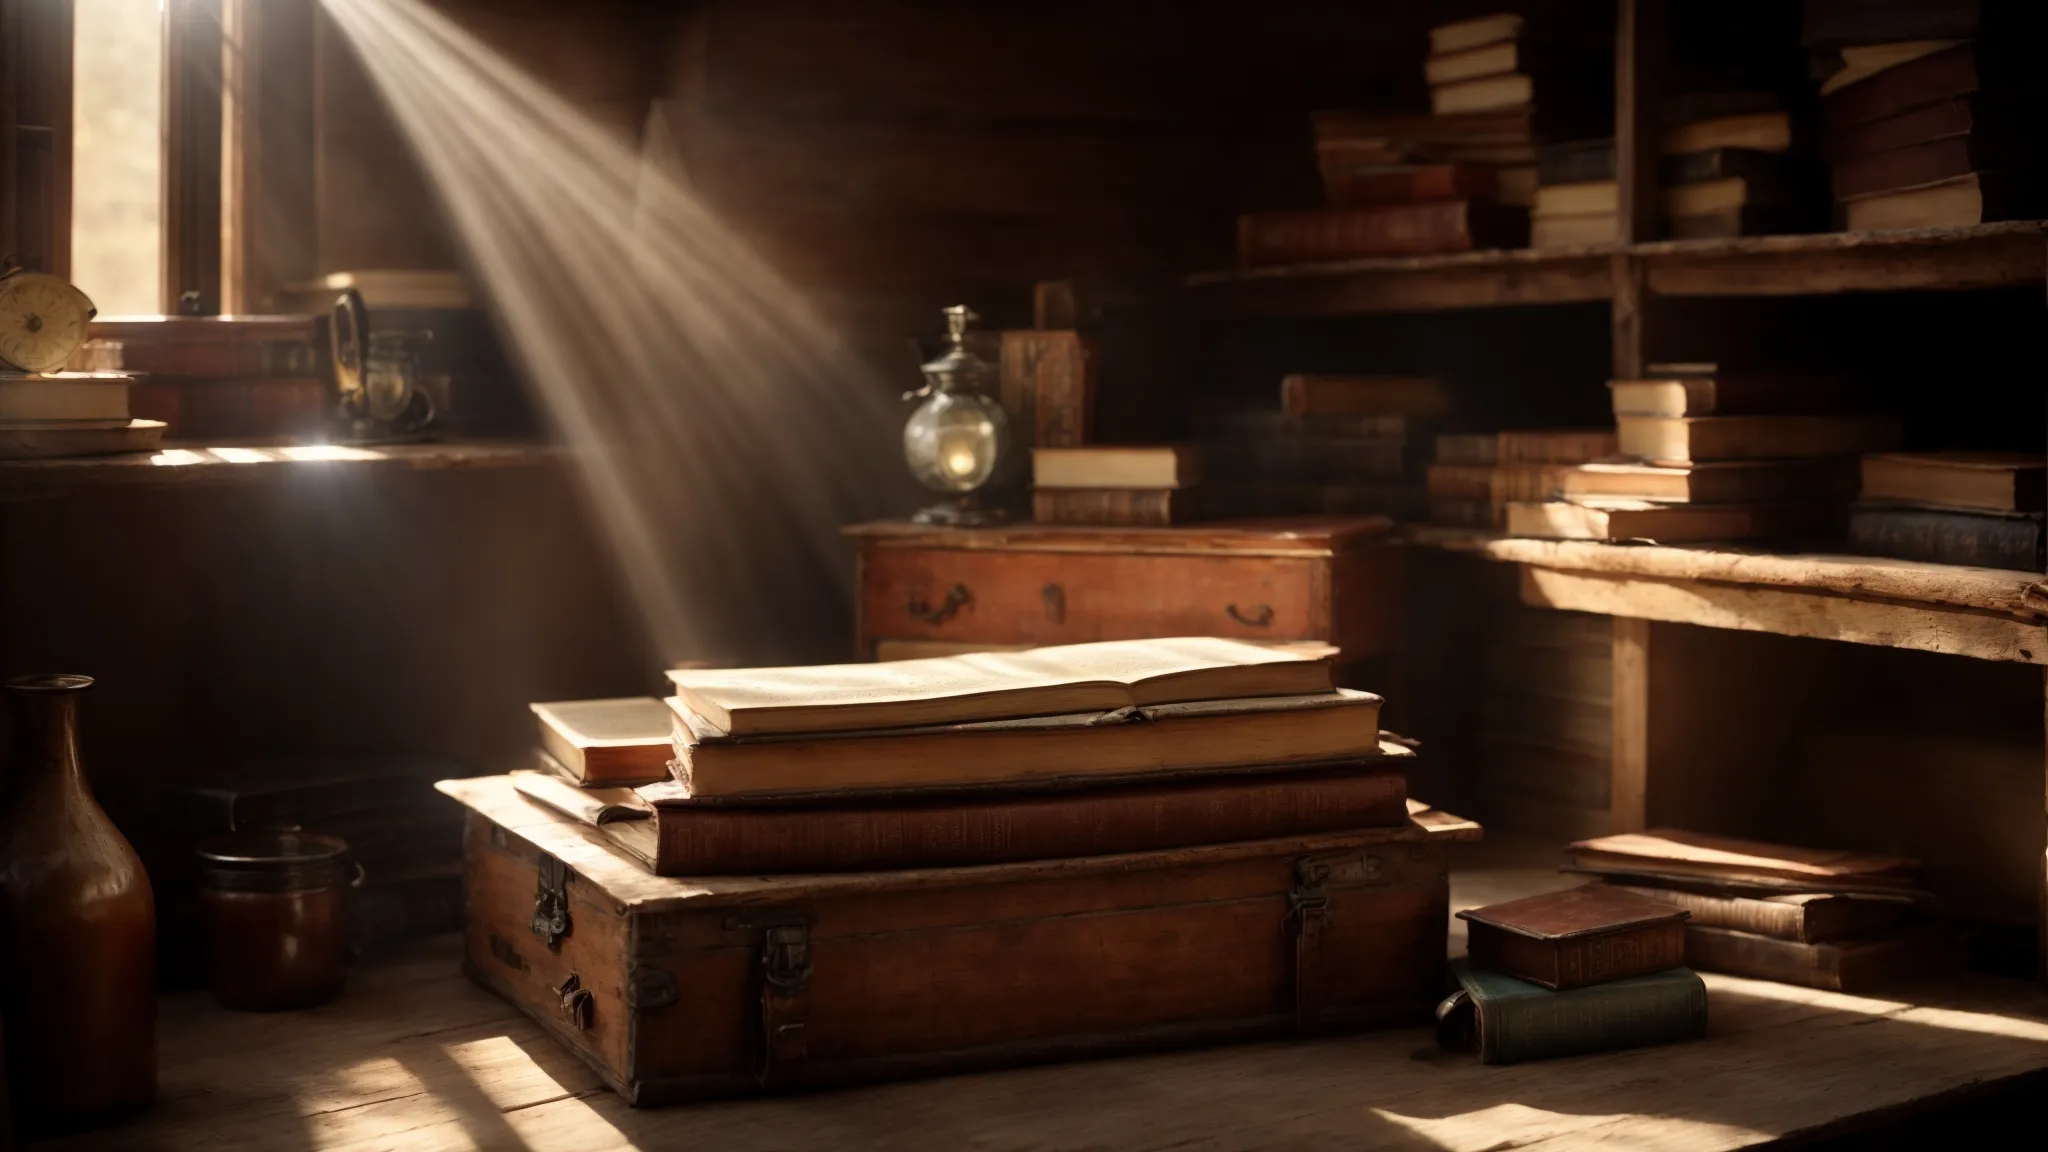 a beam of sunlight filters through a dusty attic, illuminating a pile of vintage, dust-covered books and trinkets on an old wooden chest.